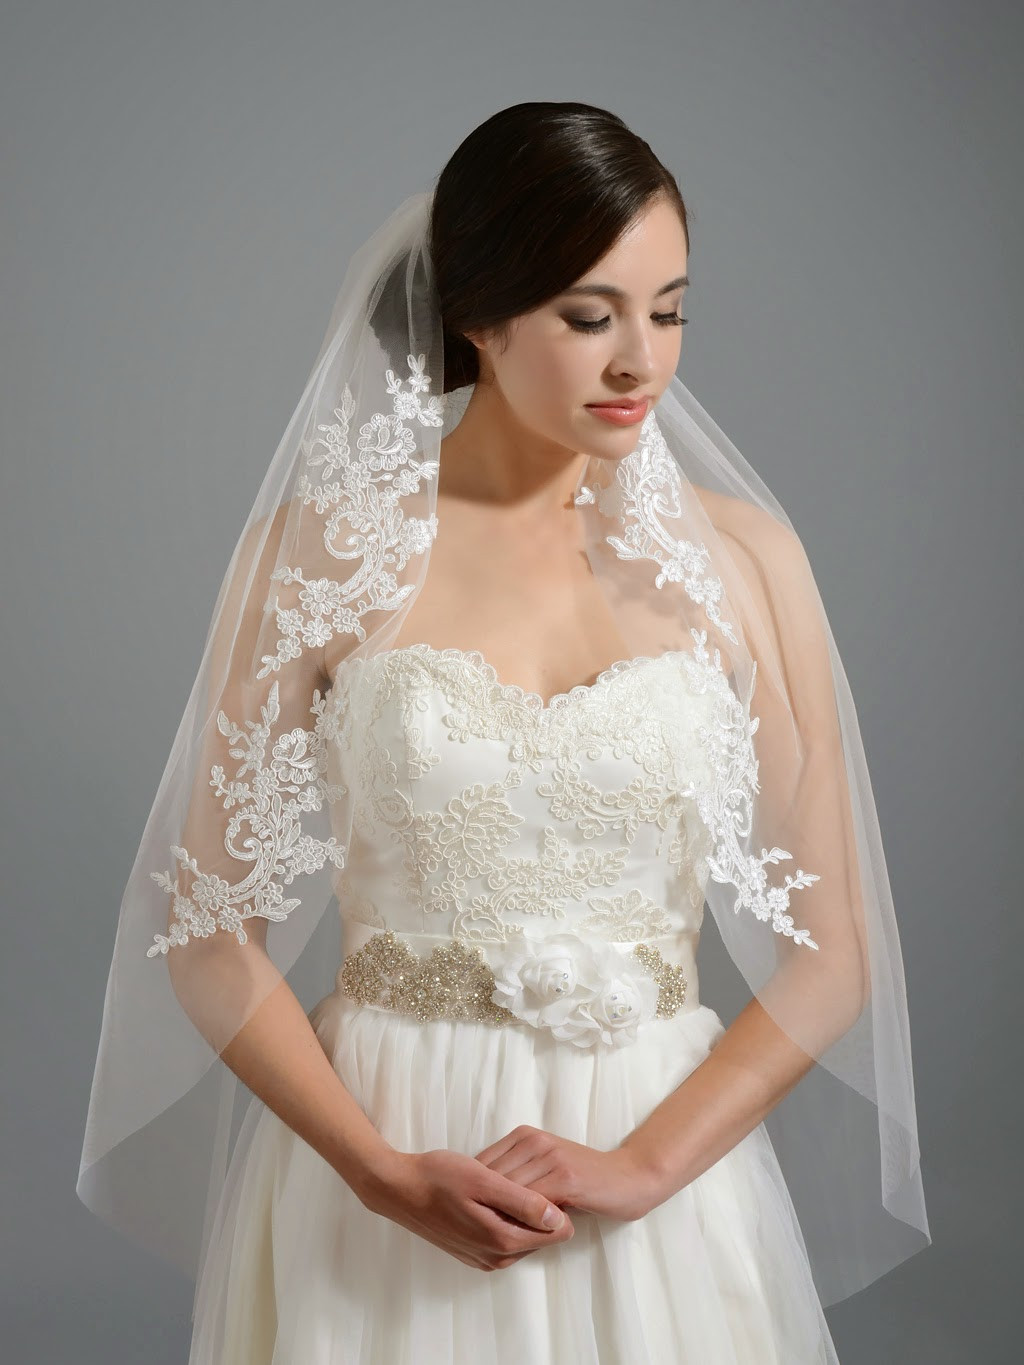 Wedding Veil Pictures
 Wedding Veil How to Select the Perfect e